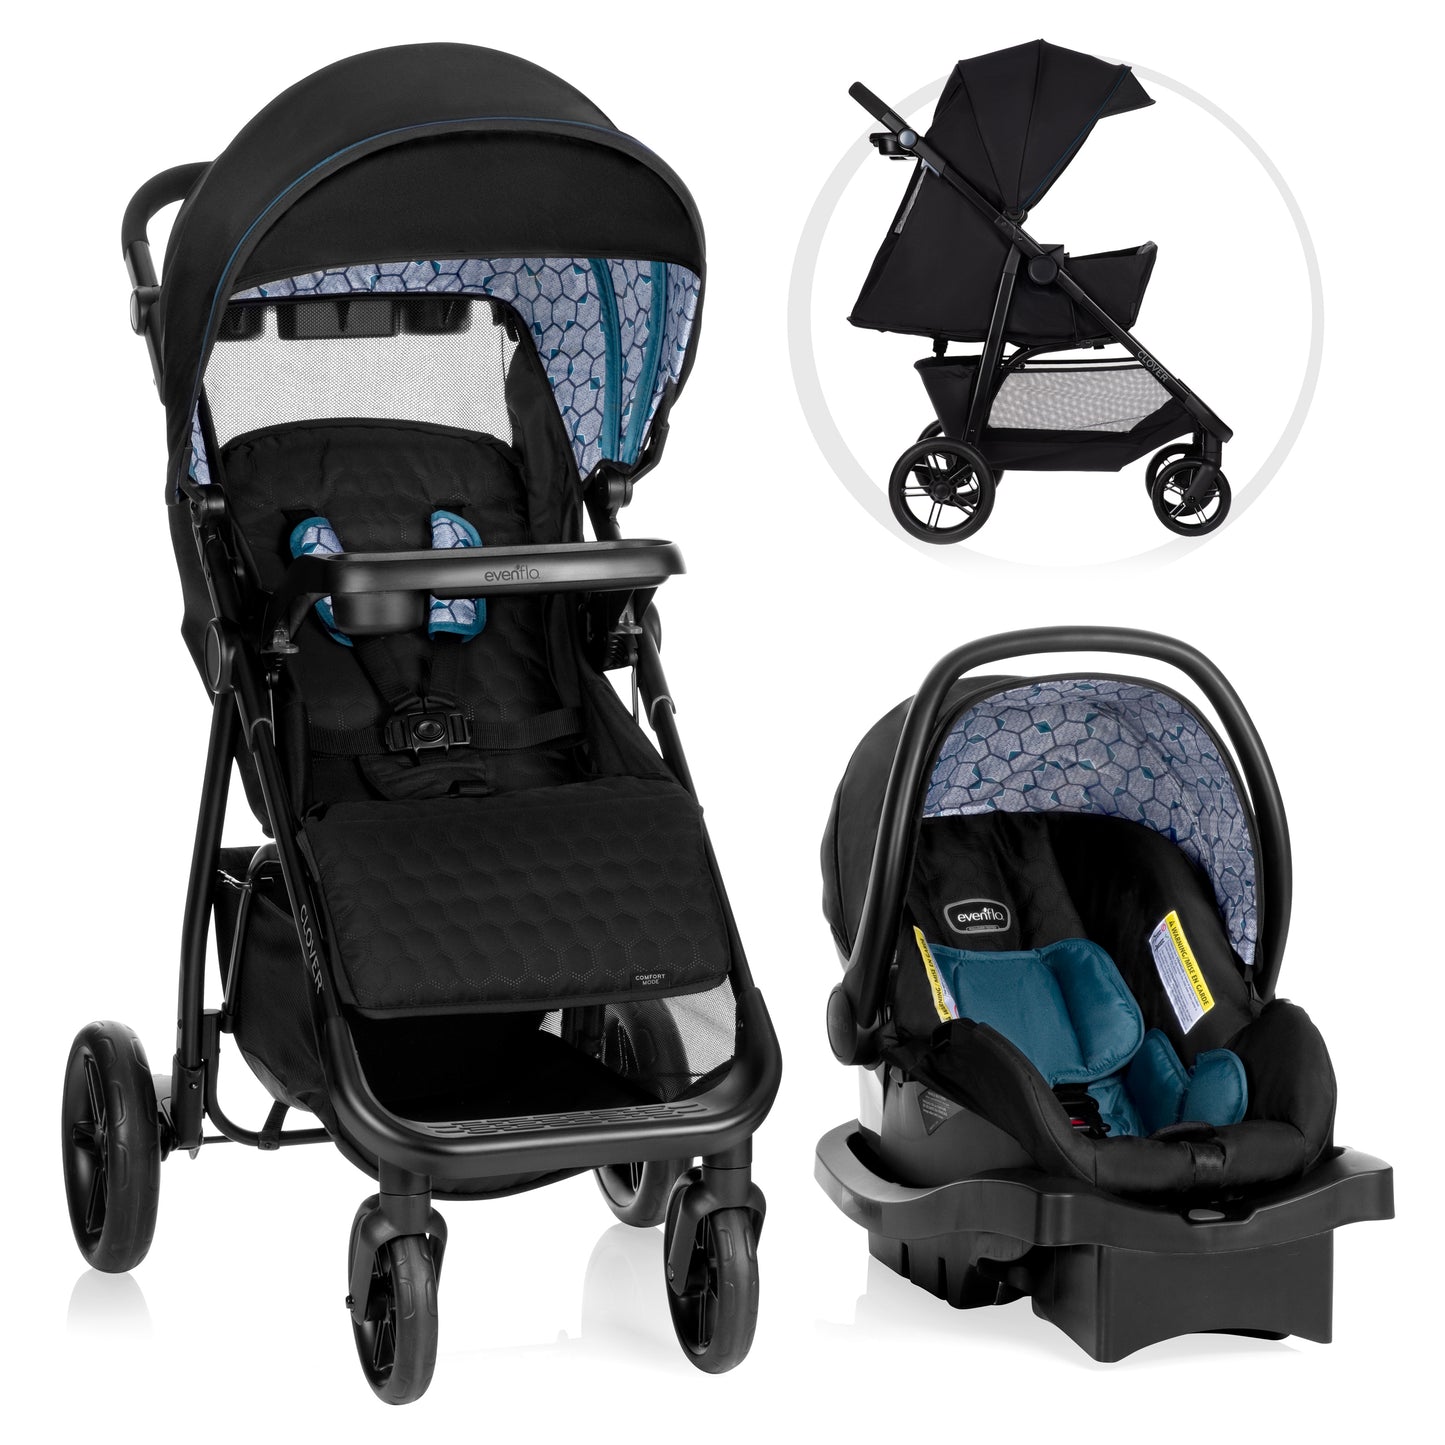 Clover Travel System with LiteMax Infant Car Seat - Support